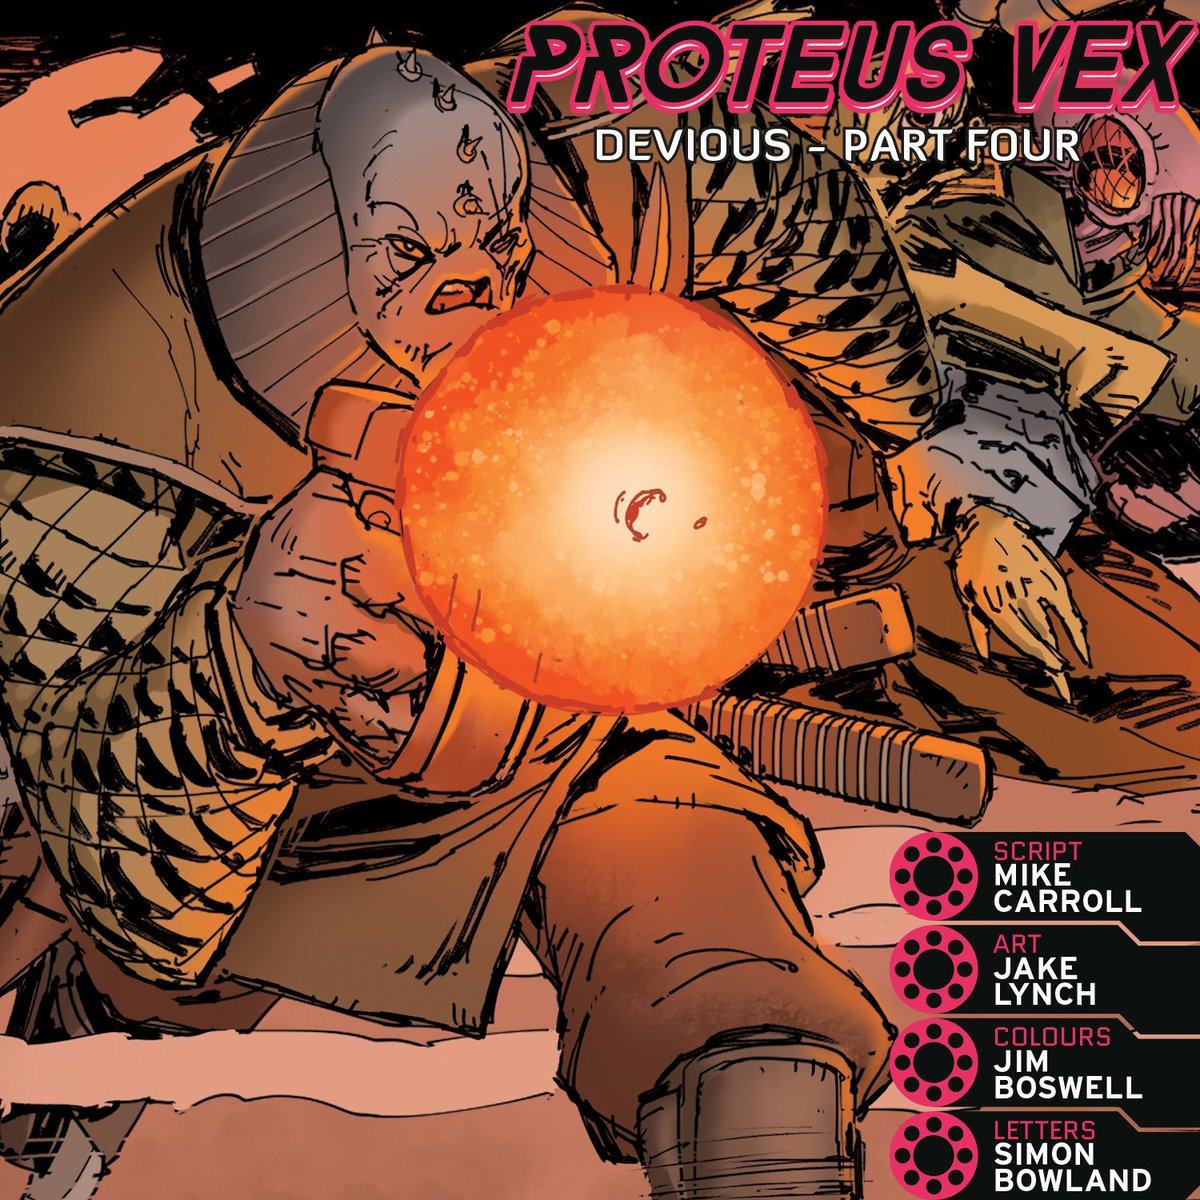 2000 AD Prog 2378 is out on 17th April - tomorrow! - featuring PROTEUS VEX: DEVIOUS, part four by: 📝 Script: @MikeOwenCarroll ✏️ Art: @artdroid_lynch 🎨 Colours: @jimboswellart 💬 Letters: @SimonBowland Subscribe now and get zarjaz free gifts ➡️ bit.ly/2Ws04uc